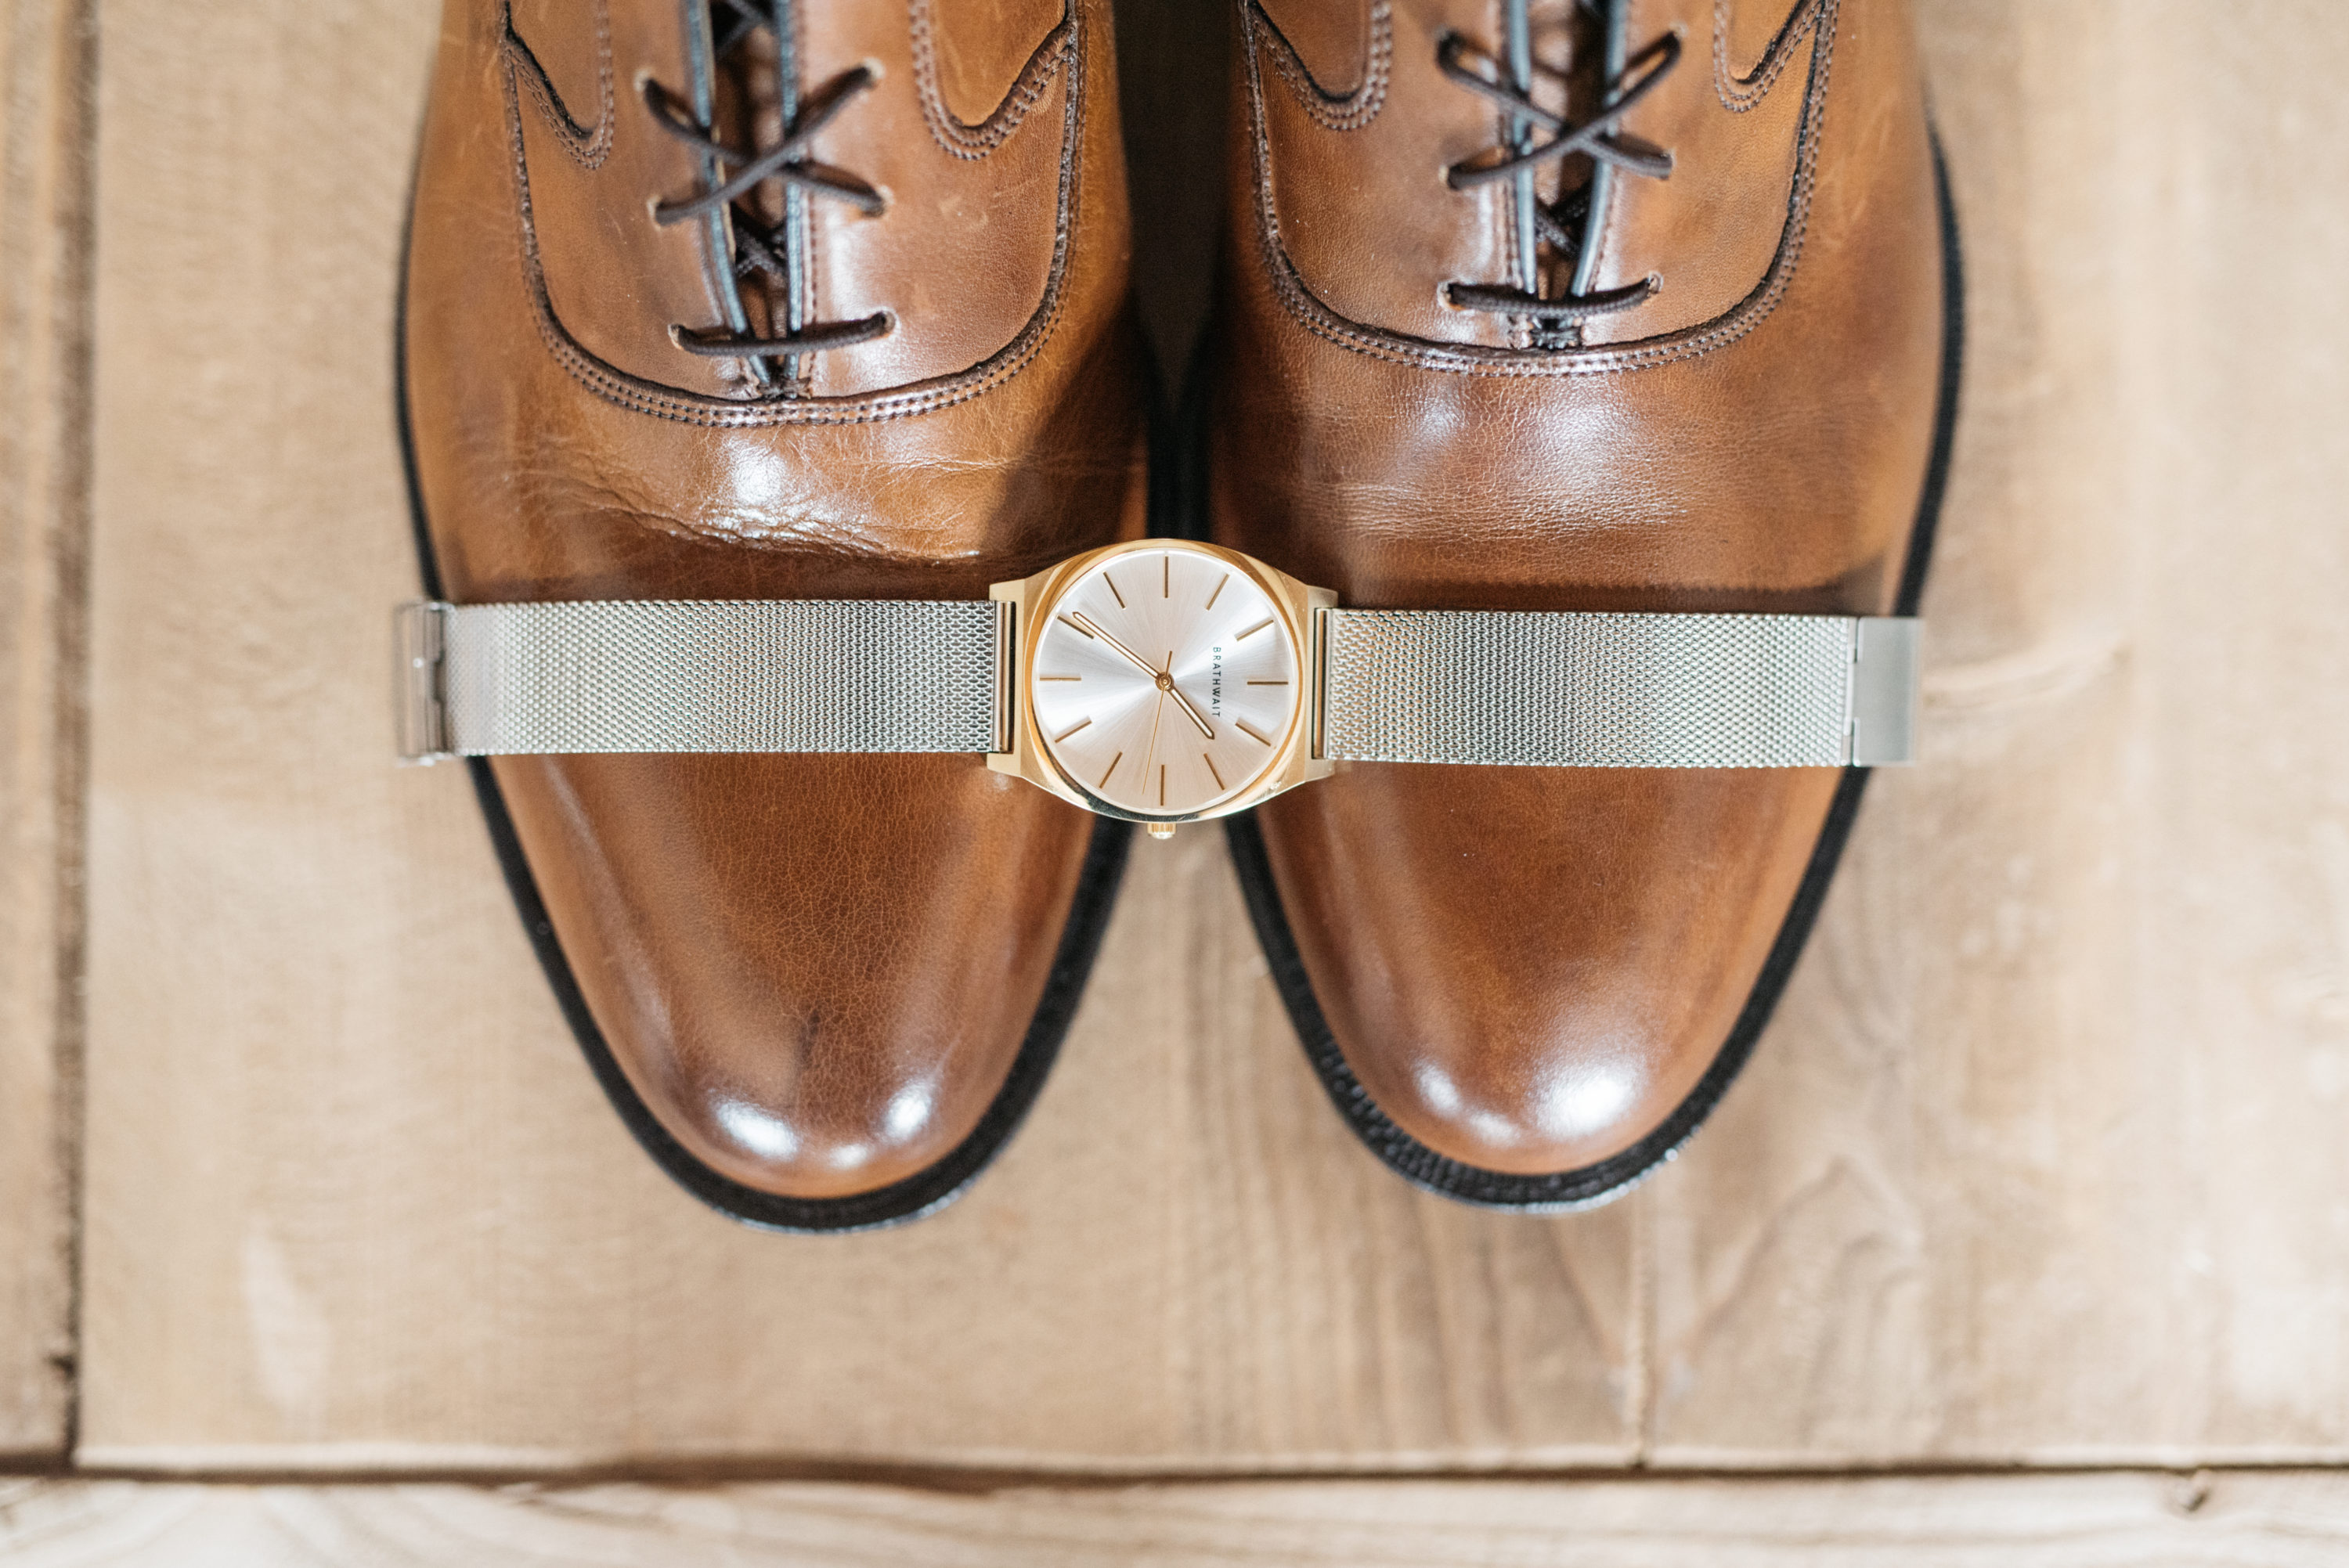 Watch and shoes - Groom wedding details